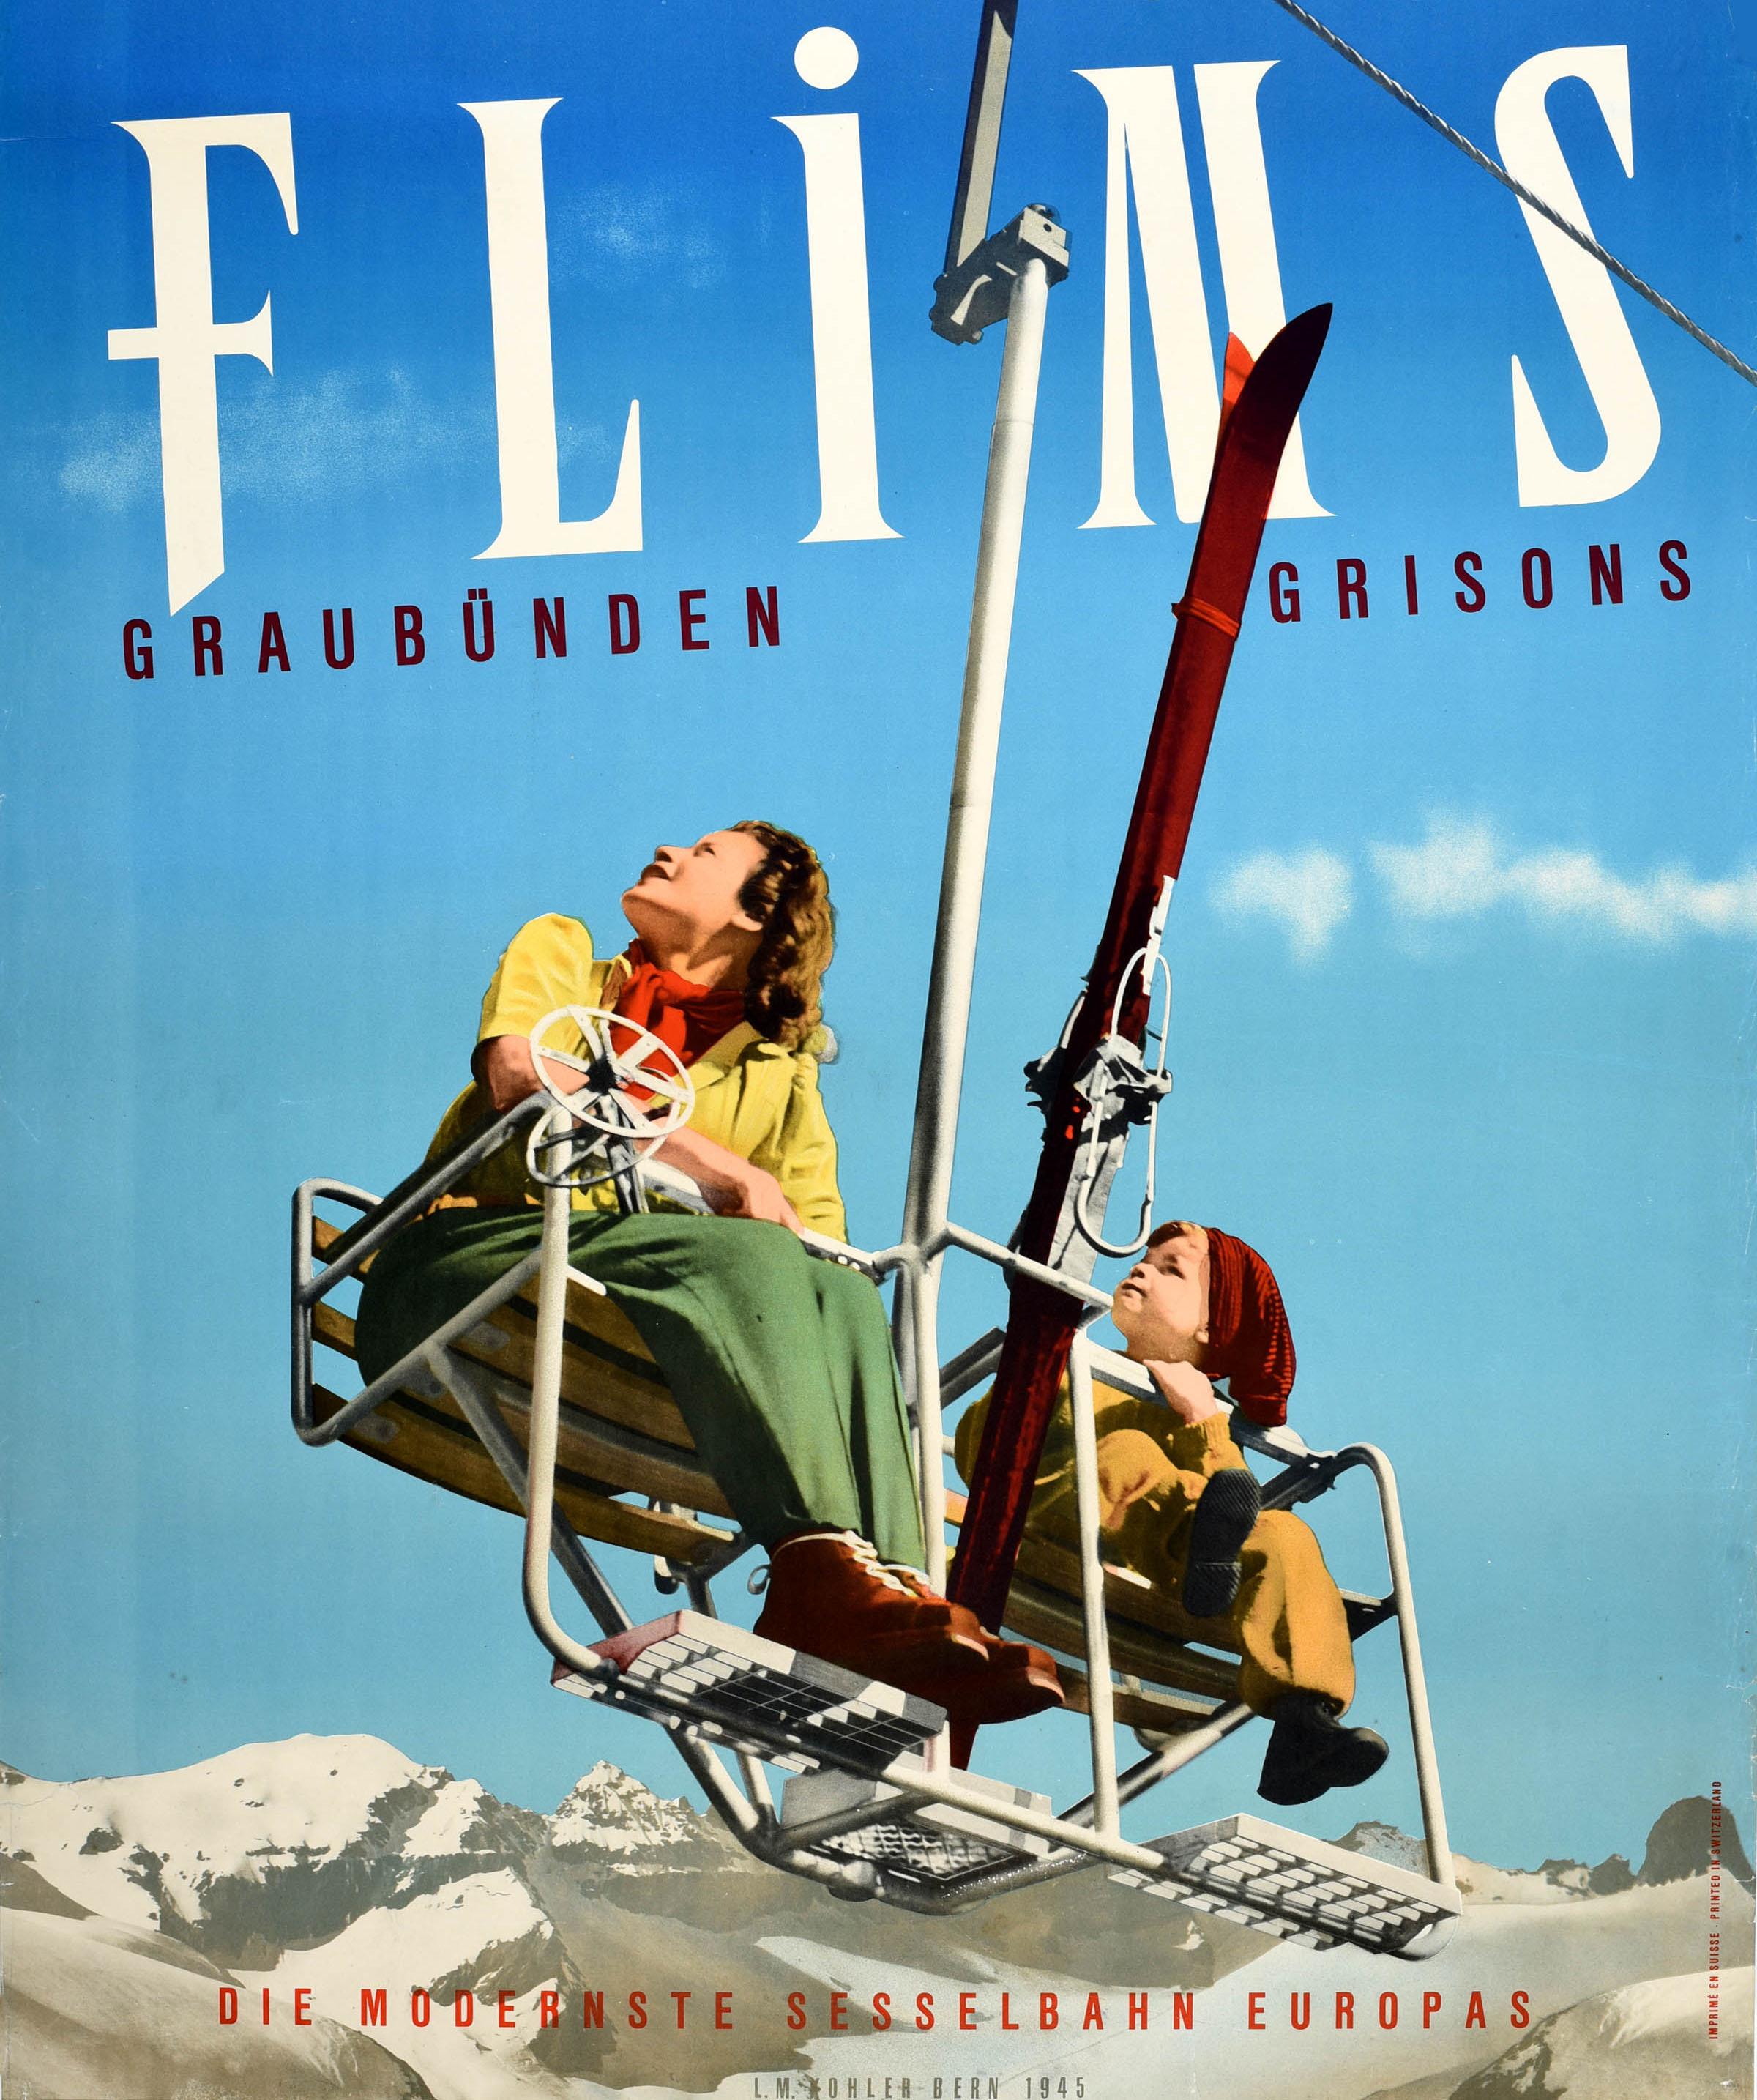 Original vintage ski poster for Flims Graubunden Grisons die modernste sesselbahn Europas / the most modern chairlift in Europe. Colourful design depicting a lady in skiing boots and holding ski poles with a child on the chairlift looking up, a pair